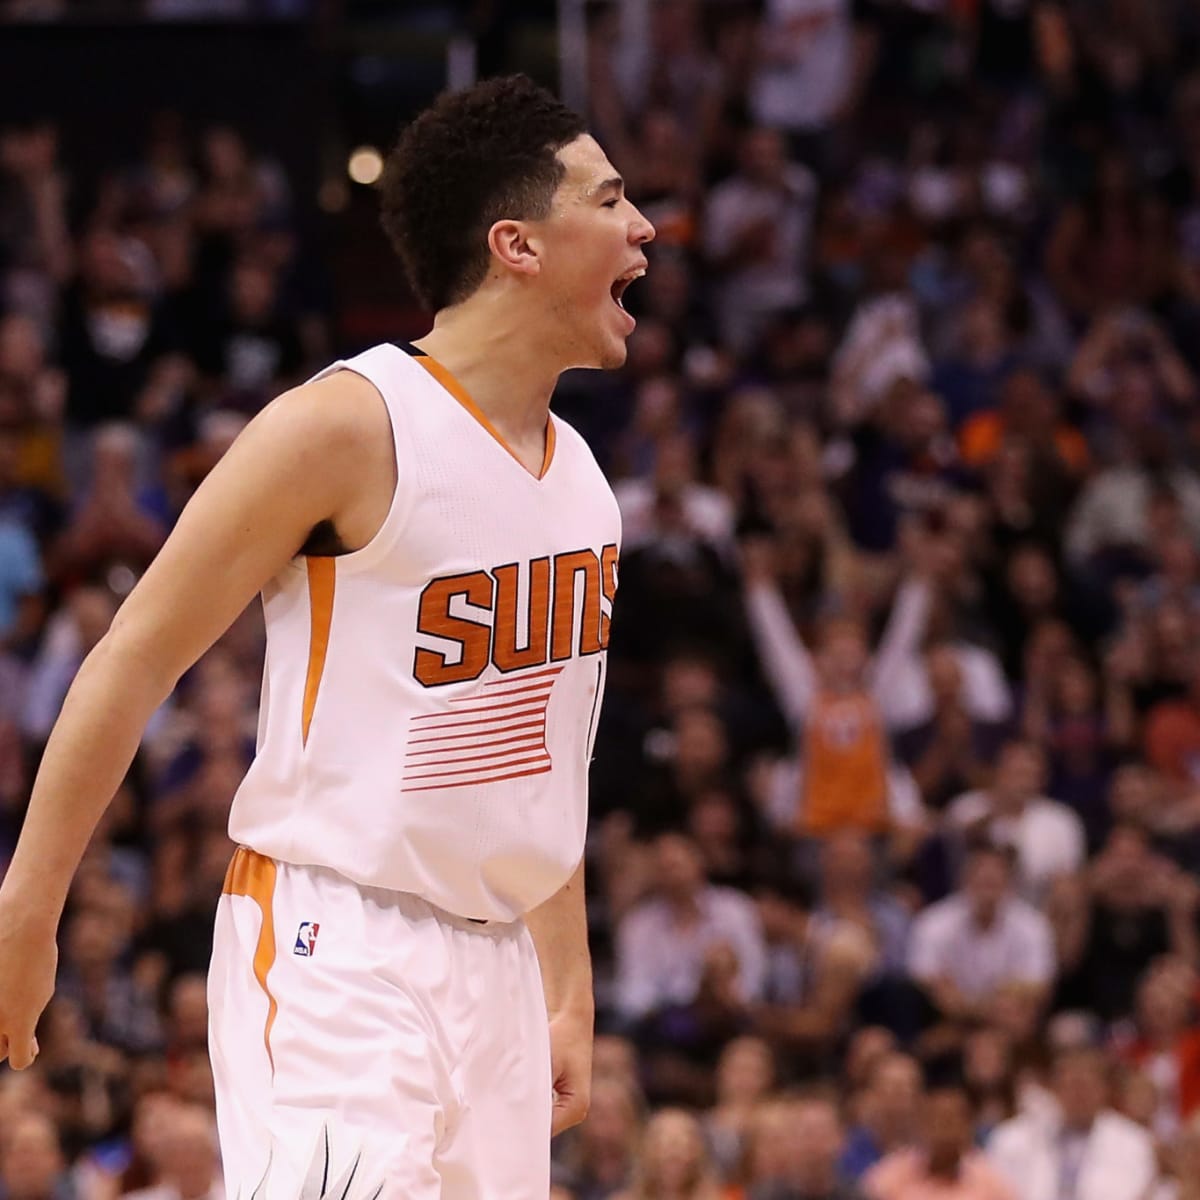 By winning Game 7, Suns' Devin Booker can turn imagination into